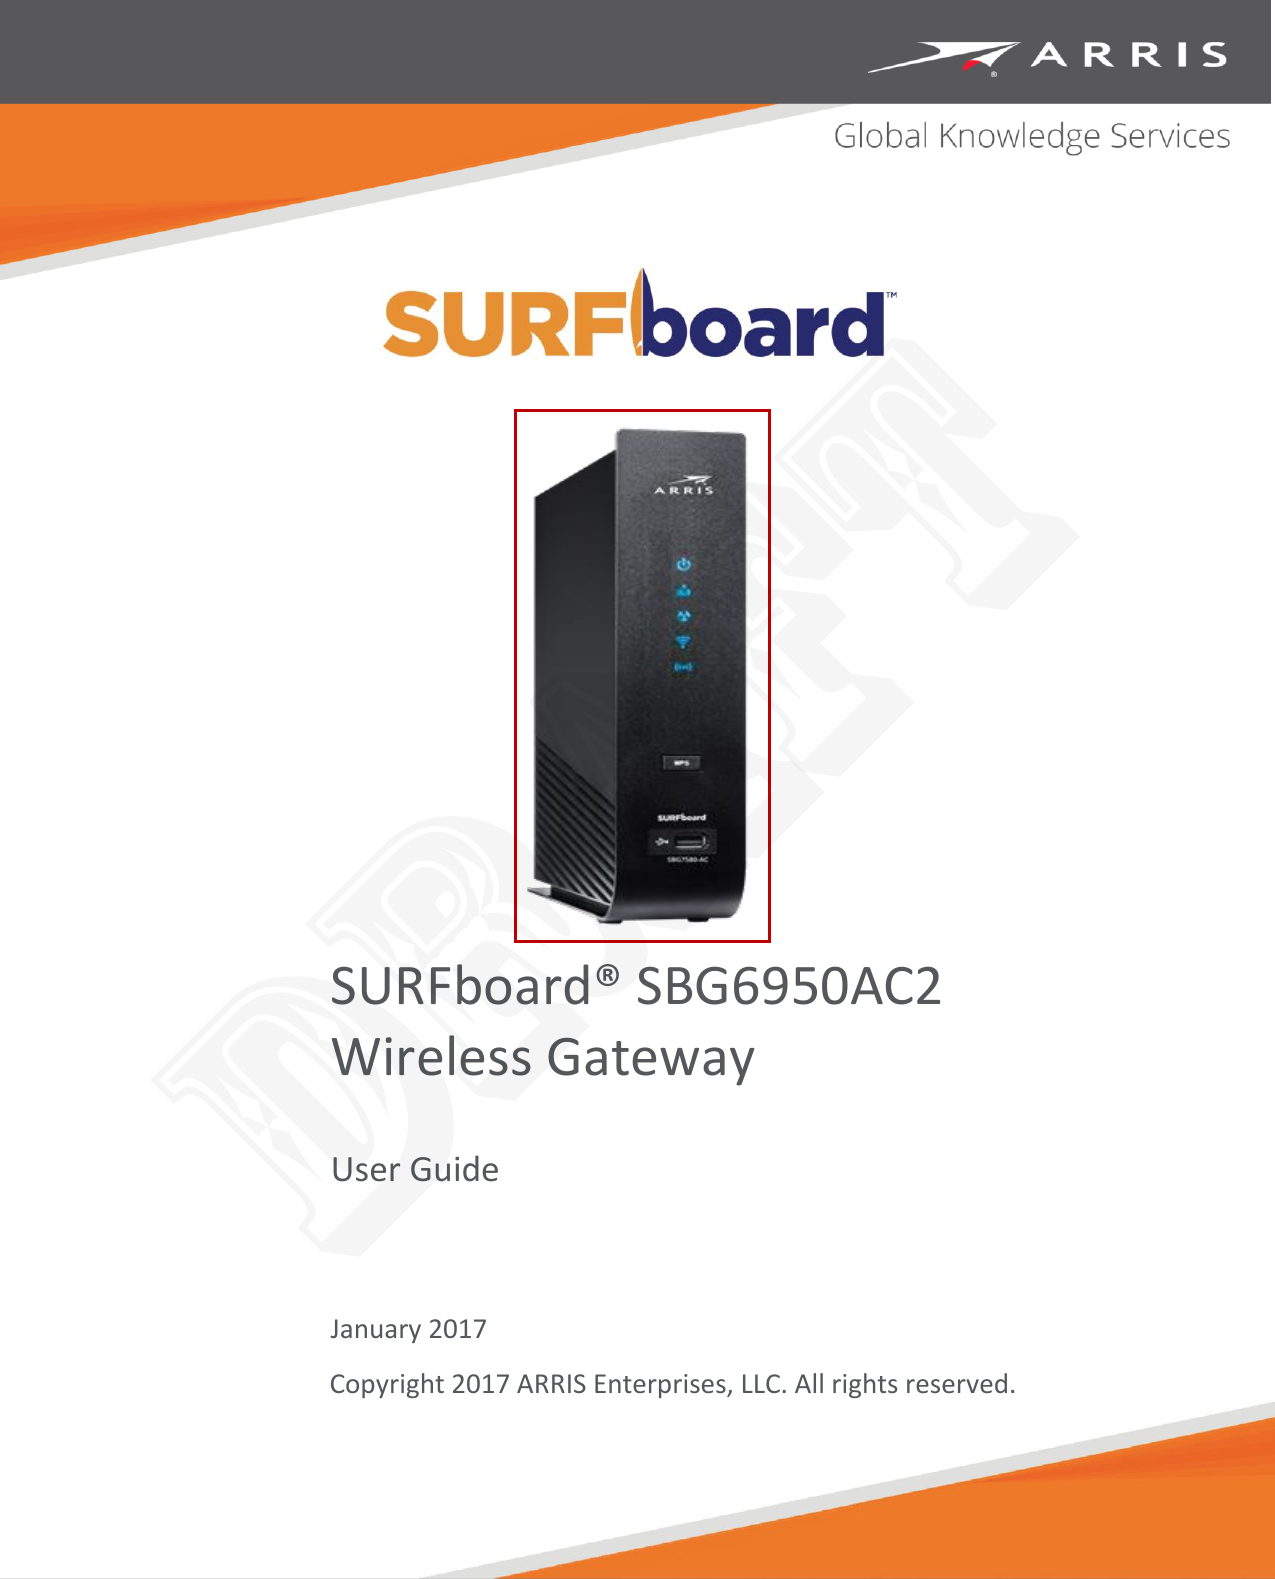   SURFboard® SBG6950AC2 Wireless Gateway User Guide    January 2017 Copyright 2017 ARRIS Enterprises, LLC. All rights reserved.  DRAFT